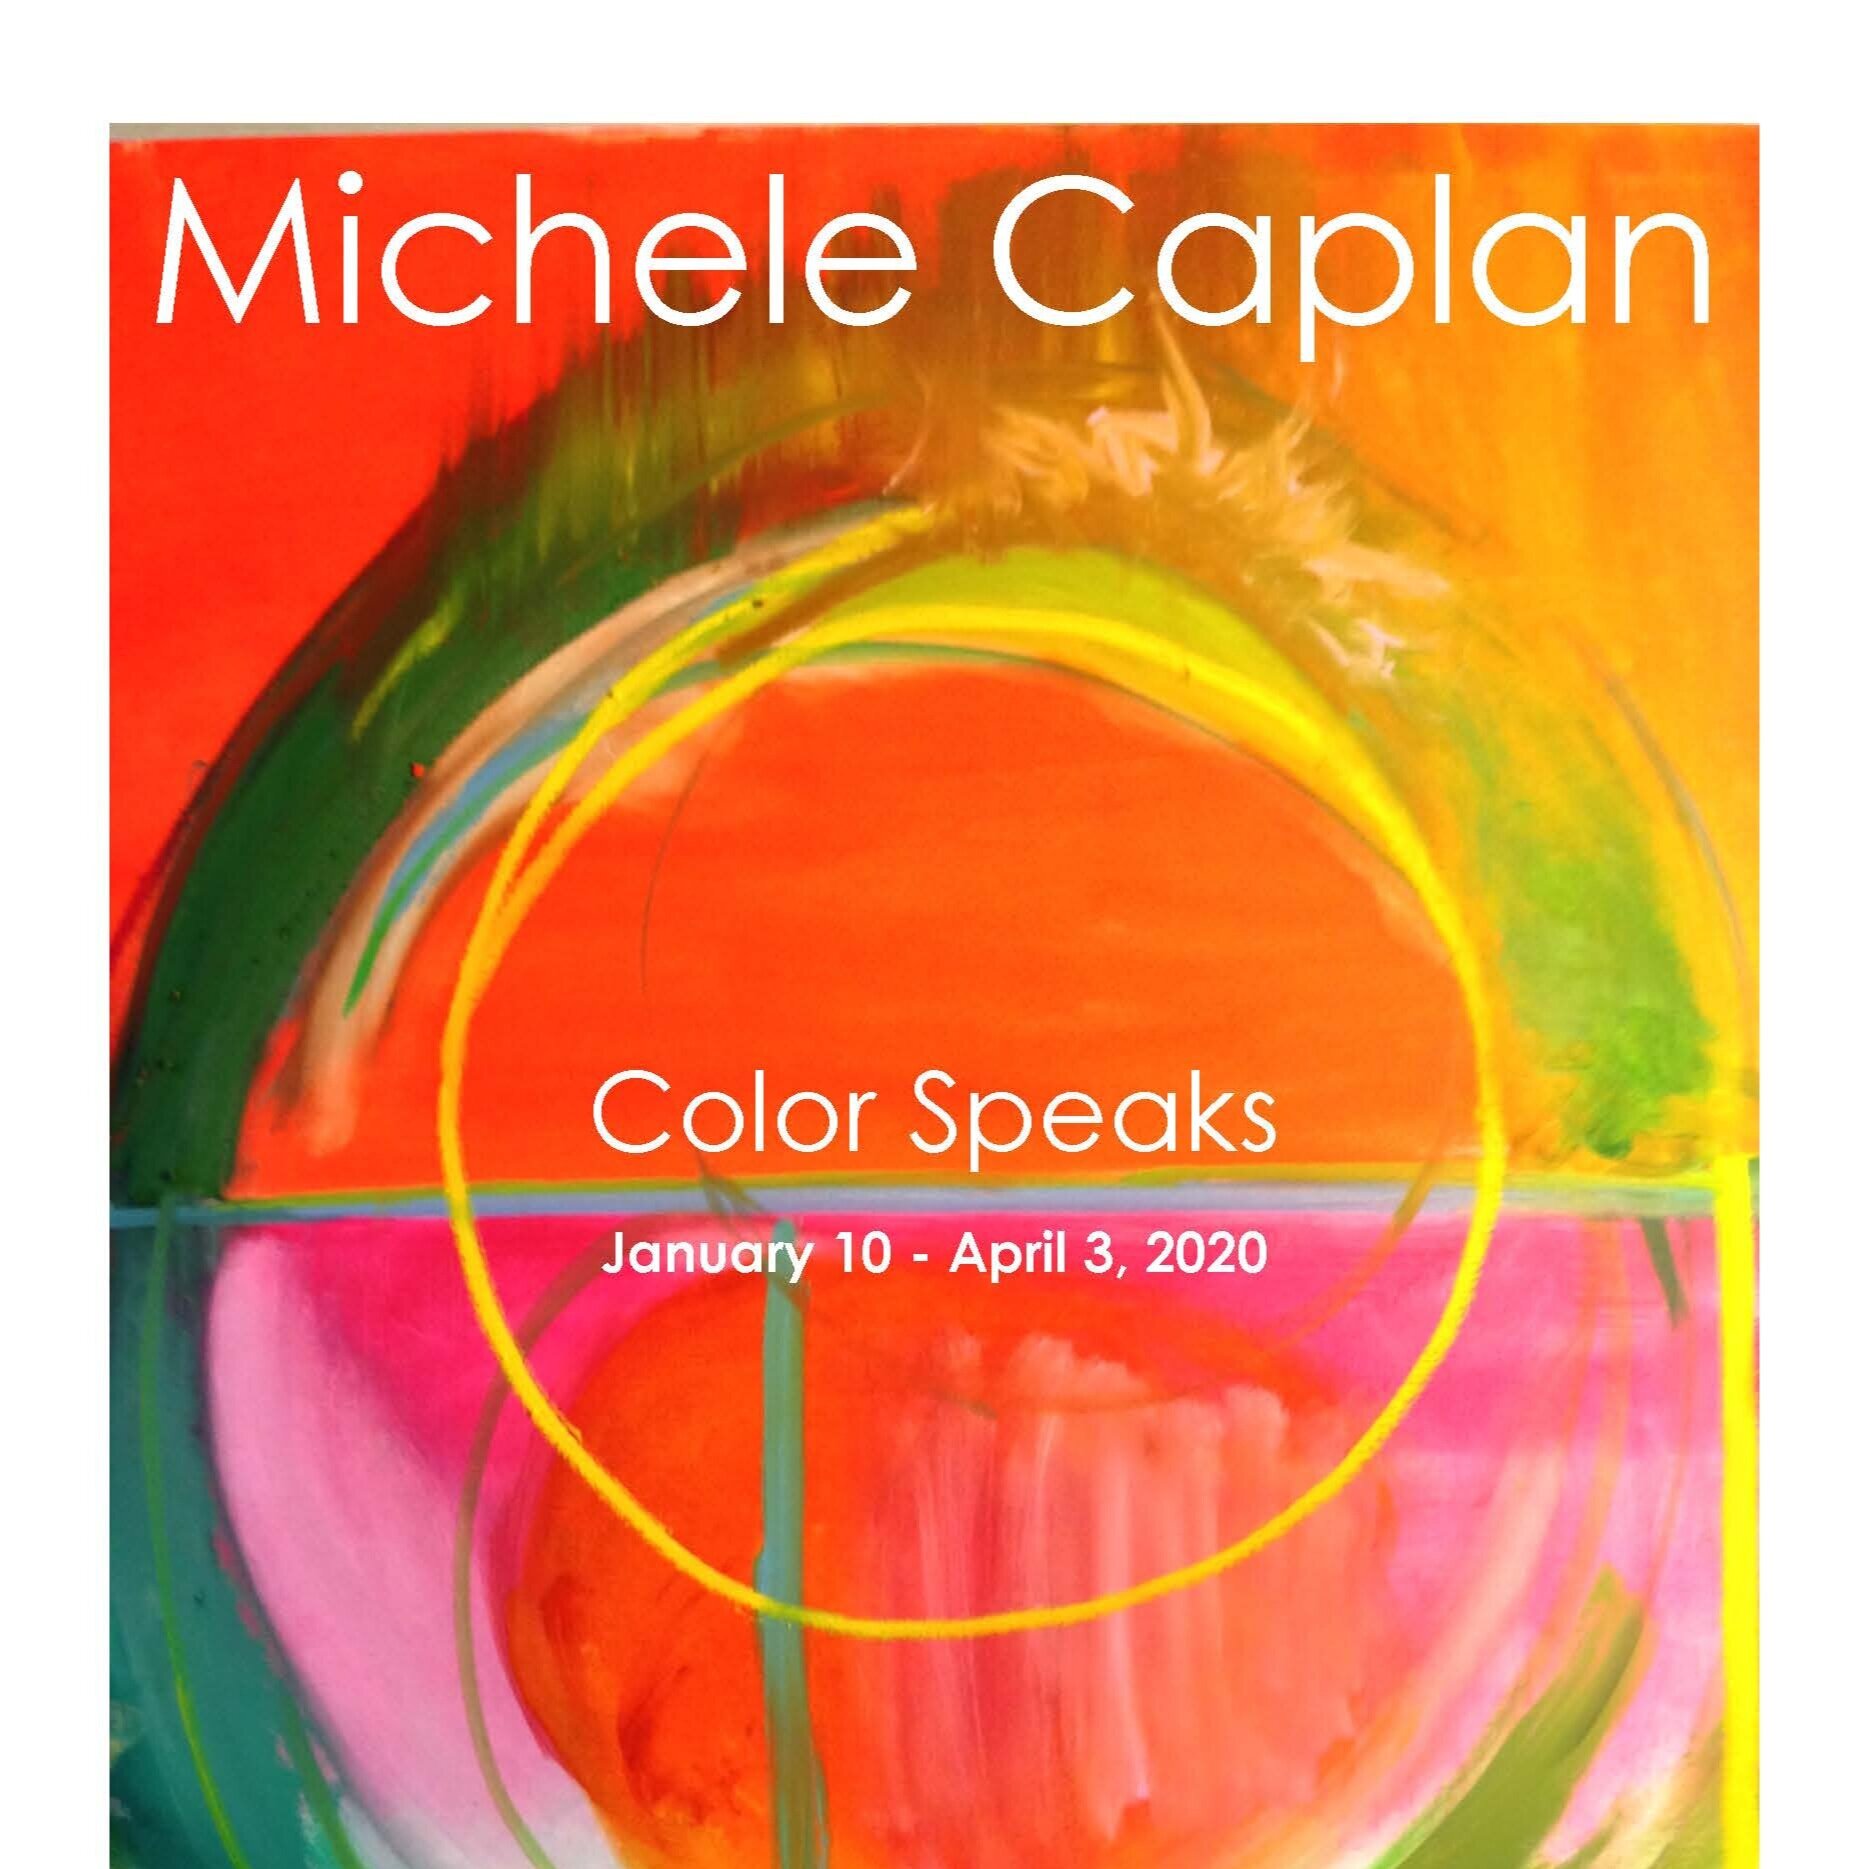  Flyer for Michele Caplan’s Color Speaks at CLICK. 